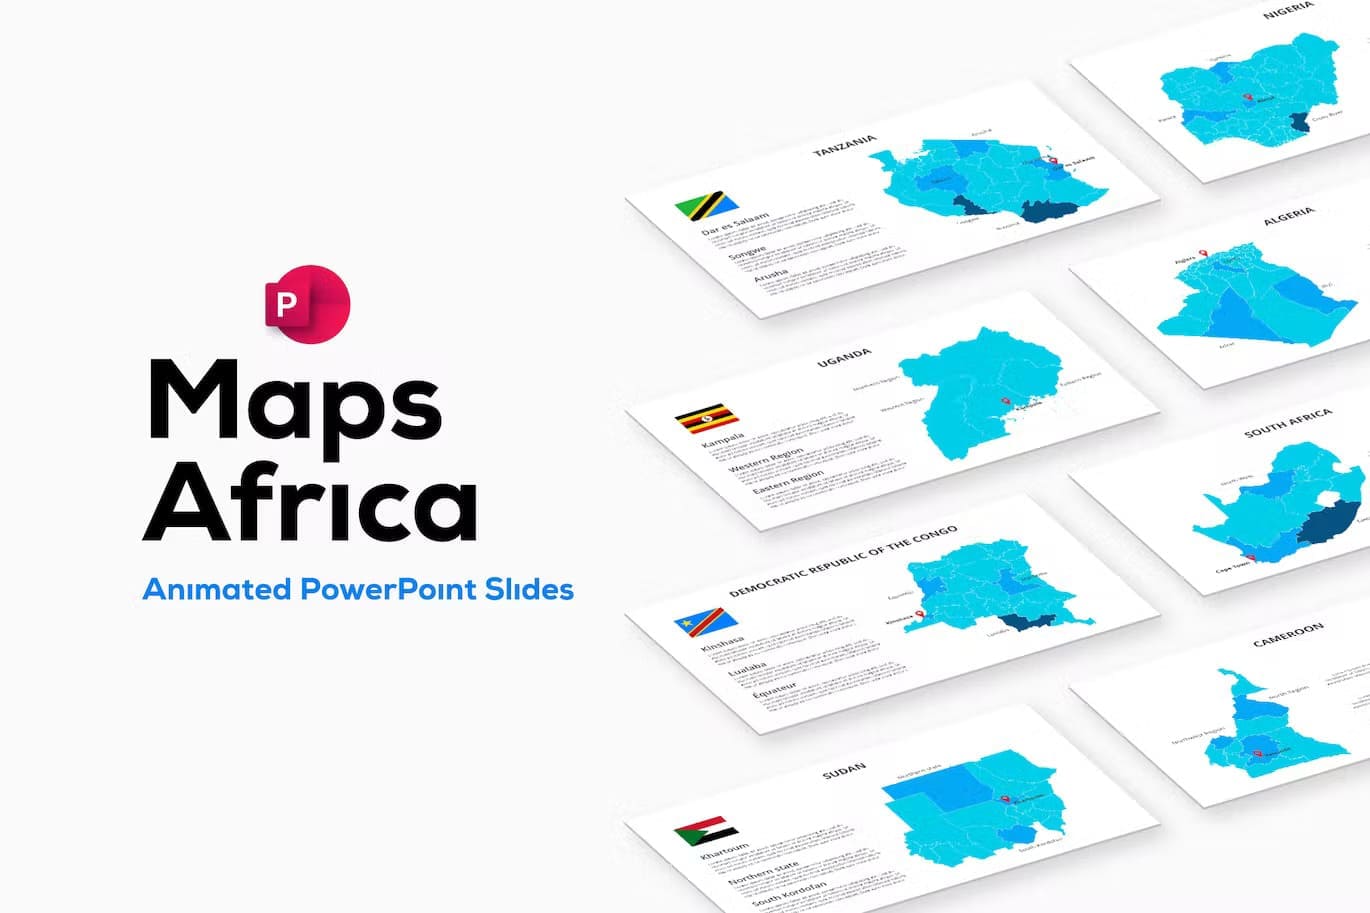 Africa maps powerpoint animated slides.